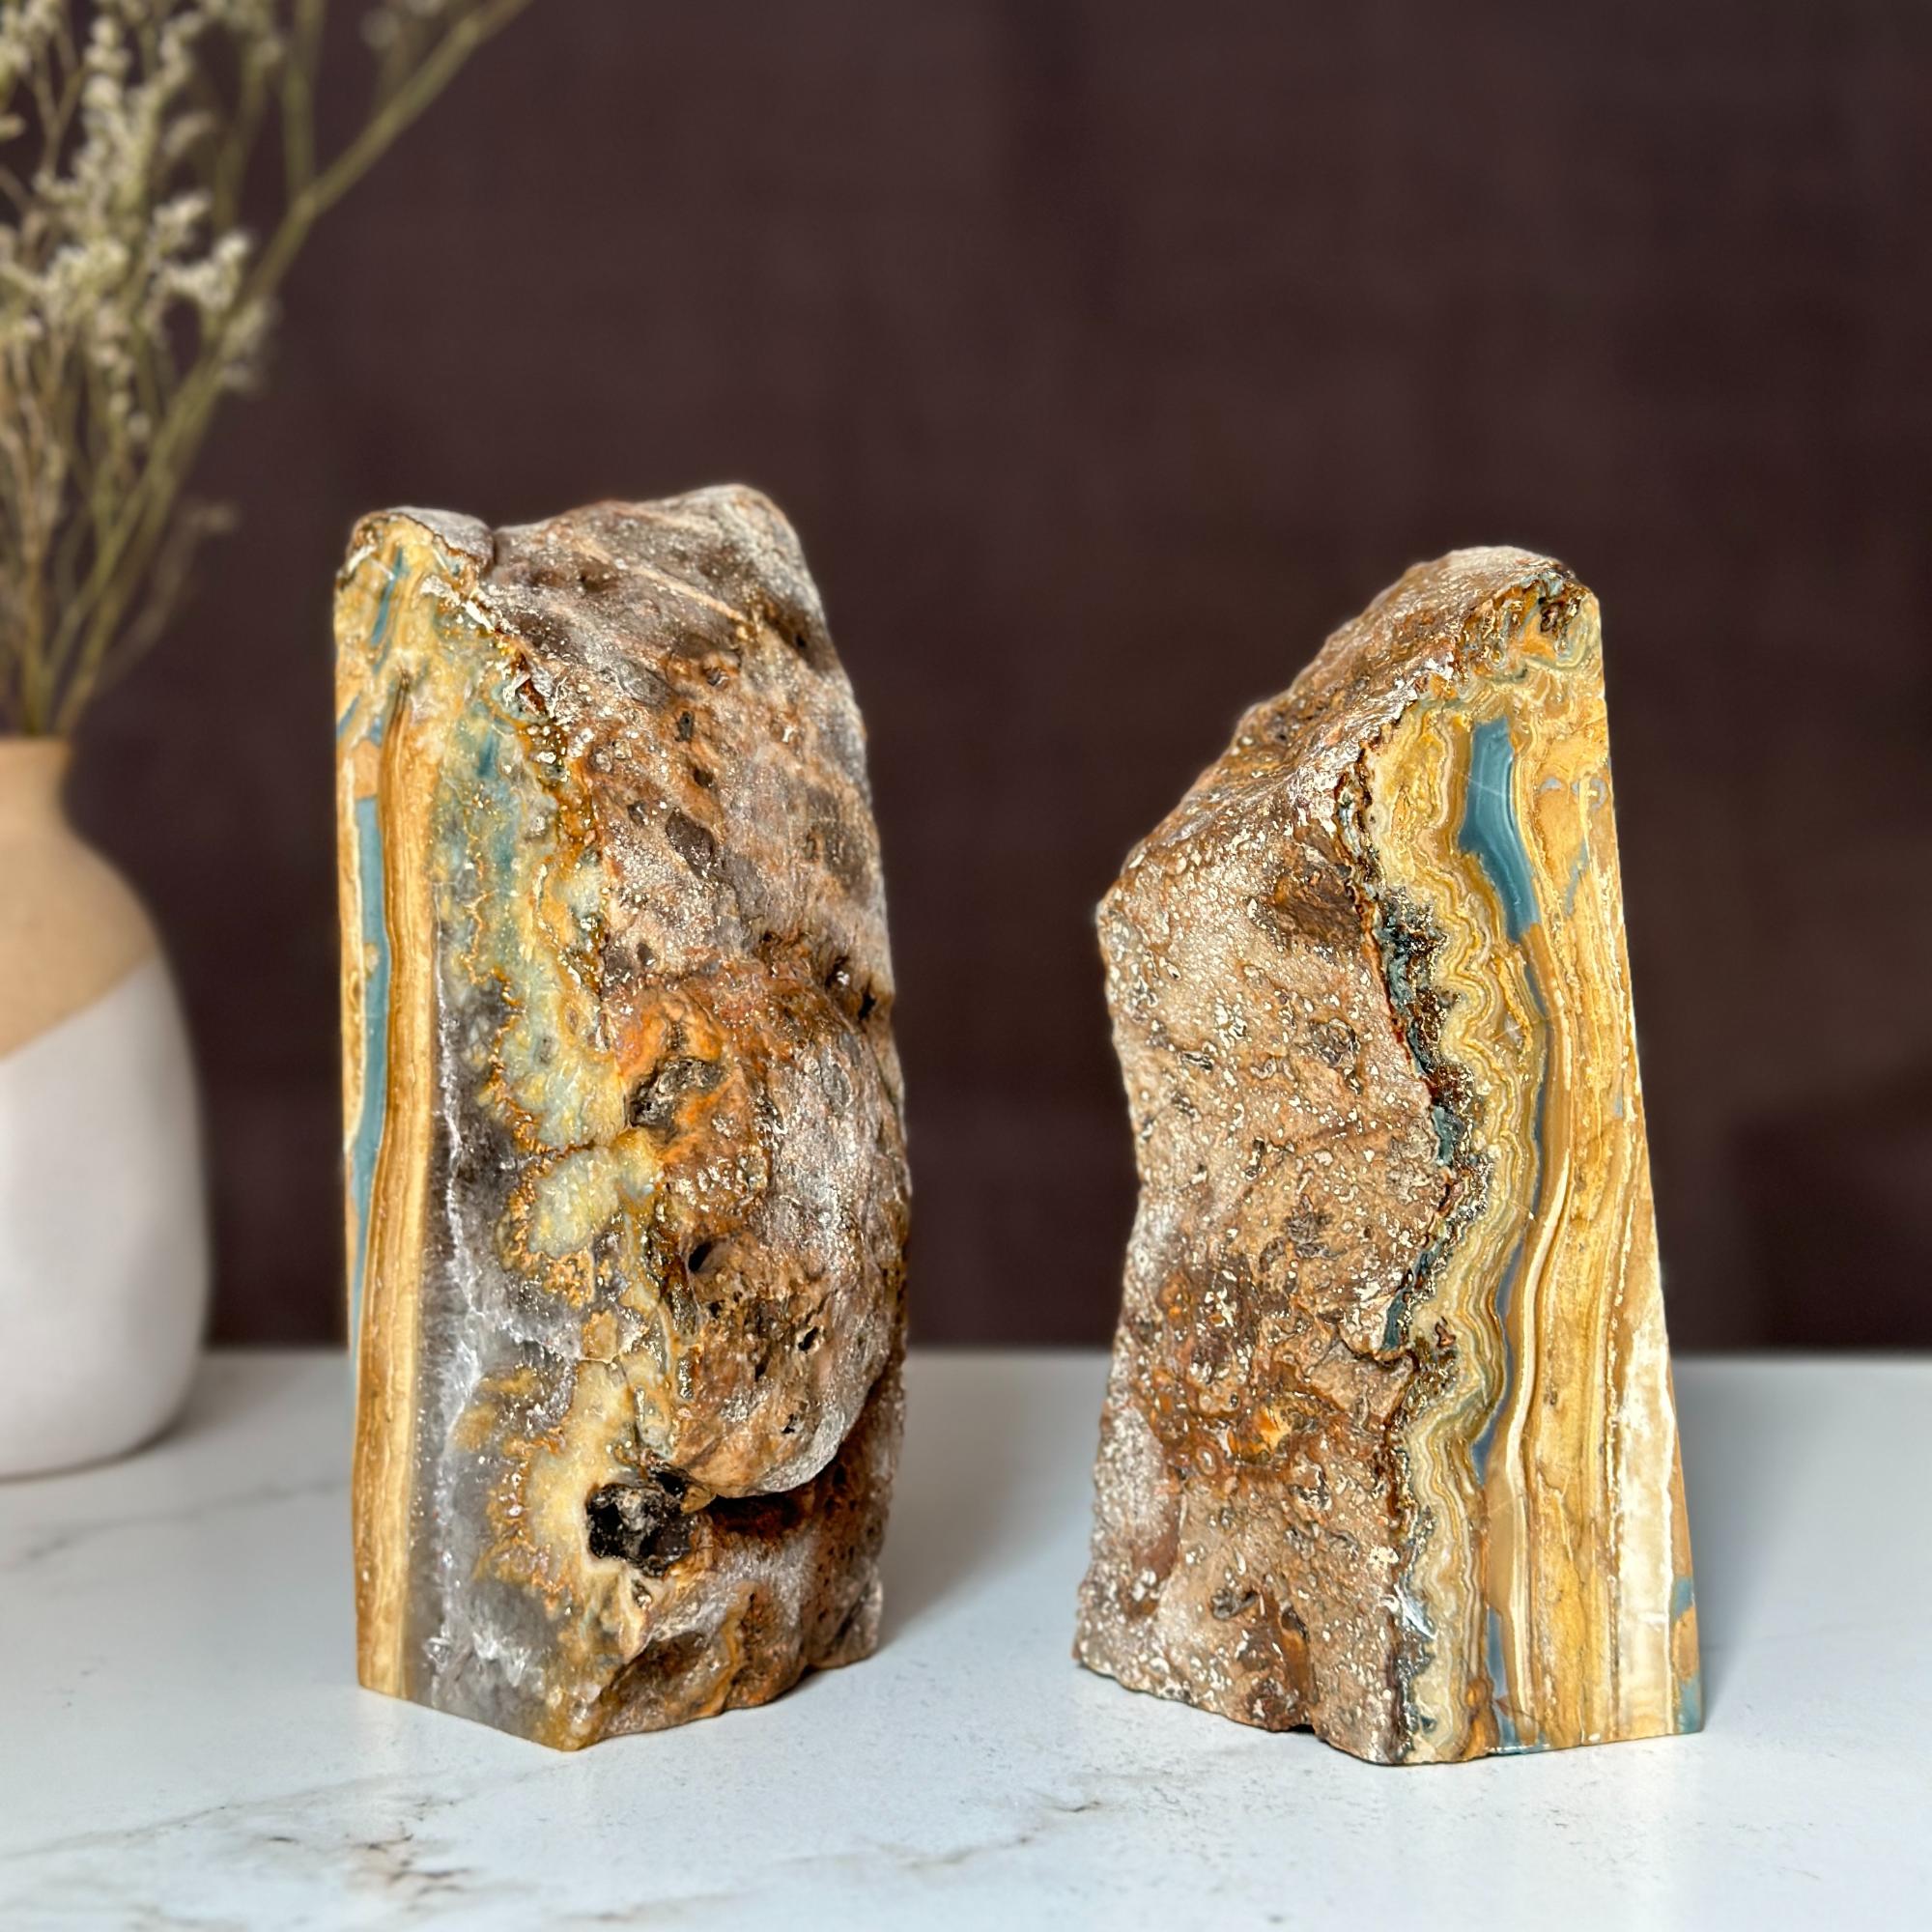 Natural Jasper and Agate Crystal Bookends, Incredible XXL Polished Stones, Premium quality crystals, extra large geode bookends for decor